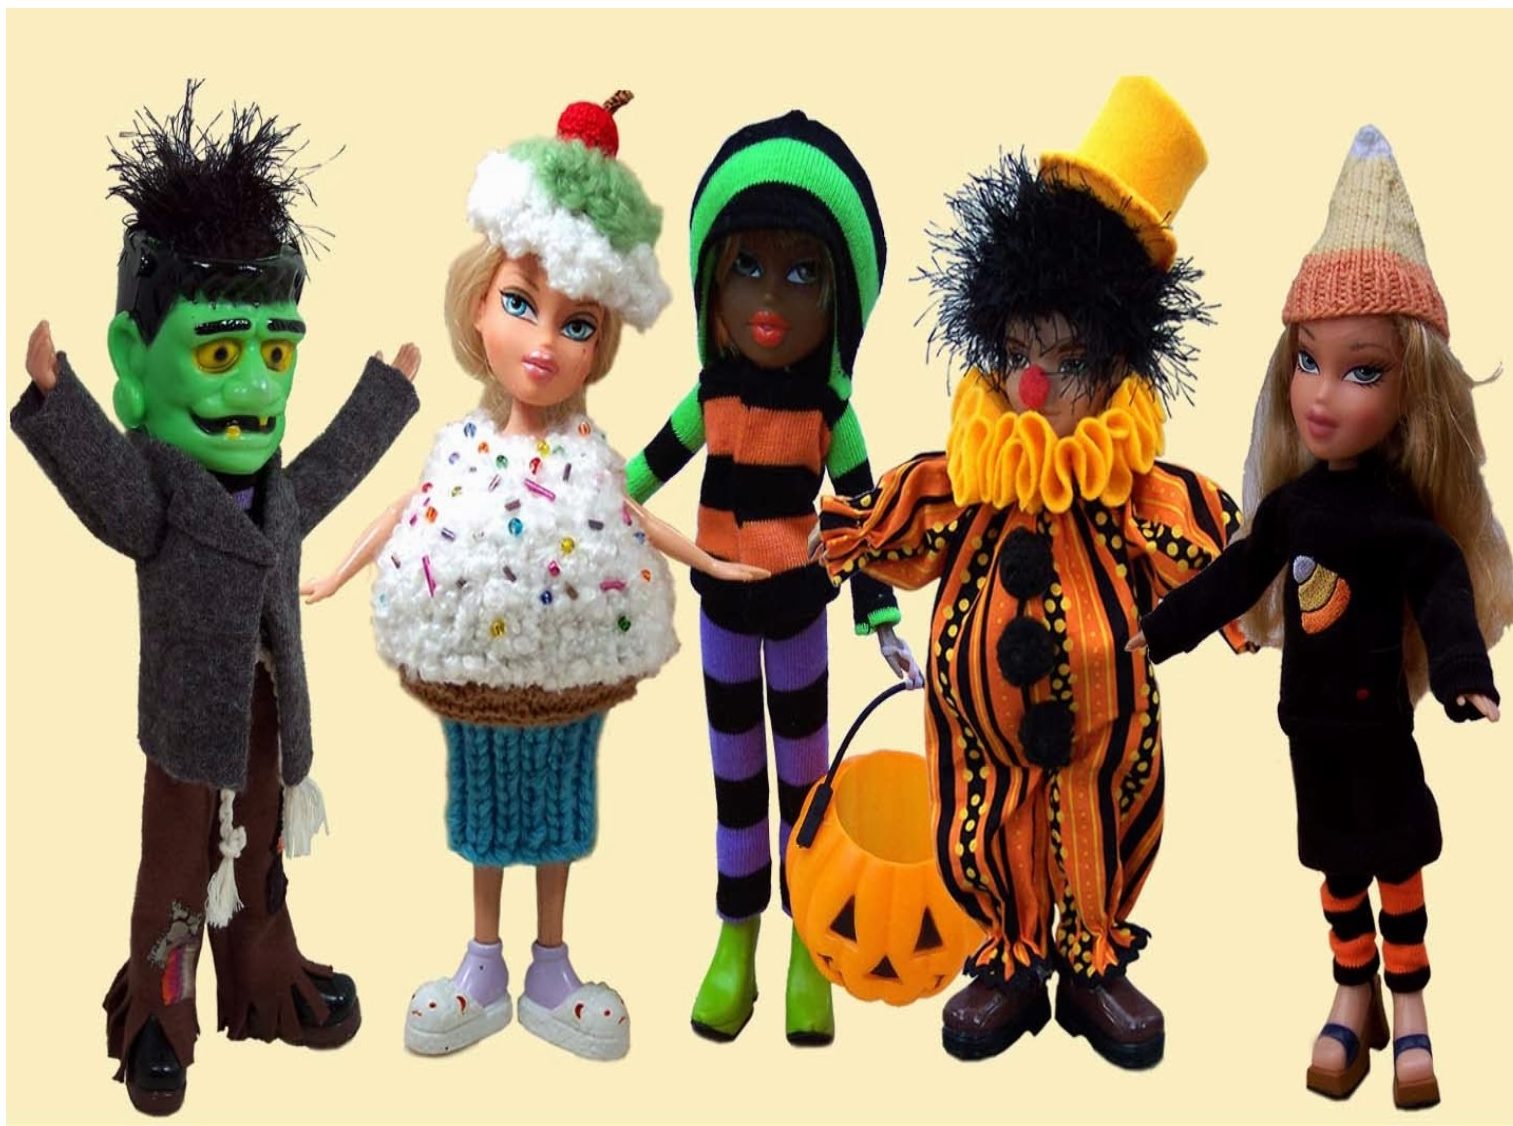 Barbie Halloween Dolls dressed like Frankenstein, ice cream, flanneled checkered outfit, jack-o-lantern and candy corn